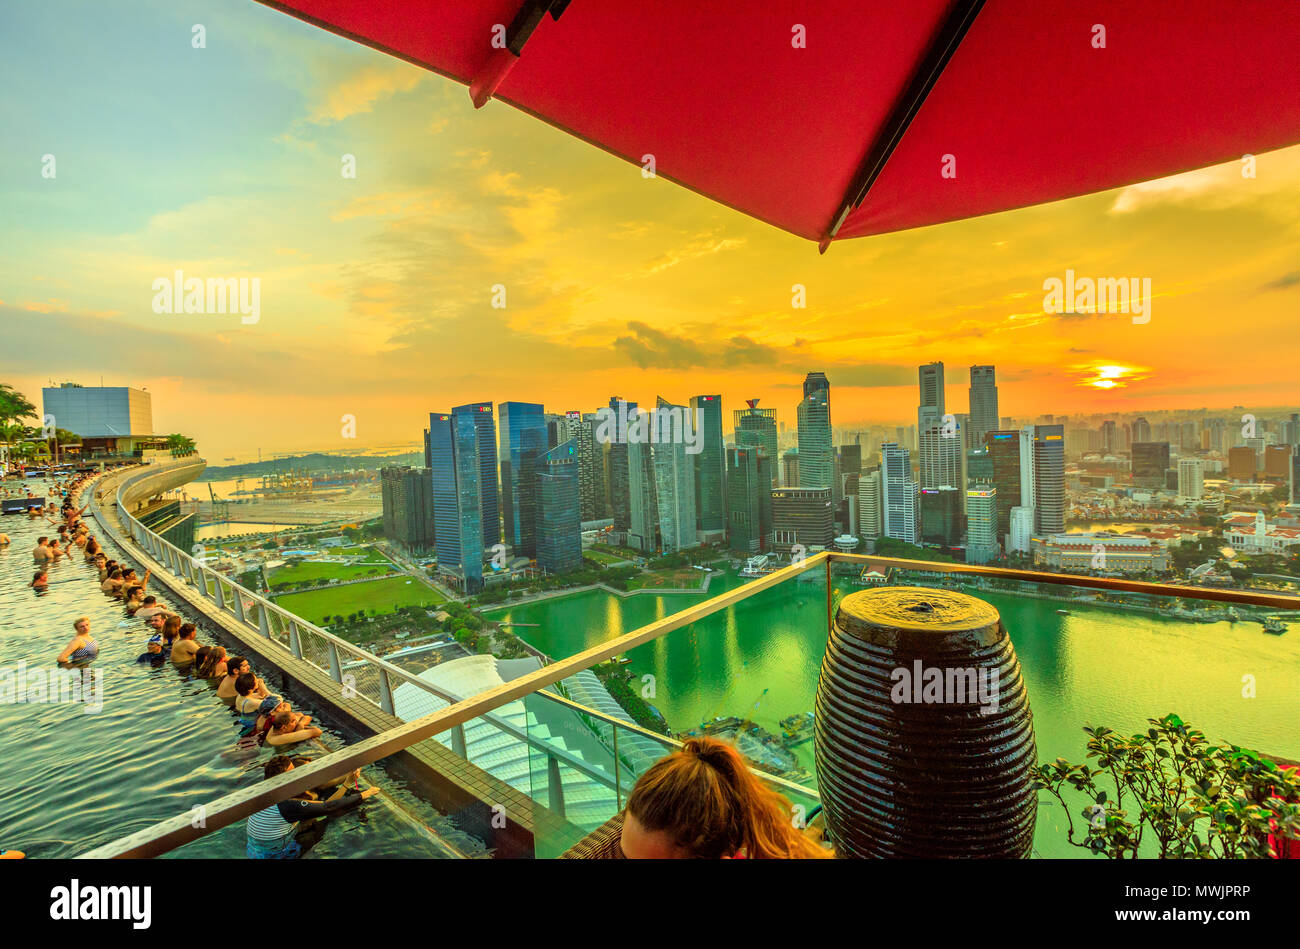 Singapore - May 3, 2018: CE LA VI Club Lounge's Sky Deck Area overlooking Infinity Pool of Skypark that tops the Marina Bay Sands Hotel. Financial district skyline on background. Sunset shot. Stock Photo